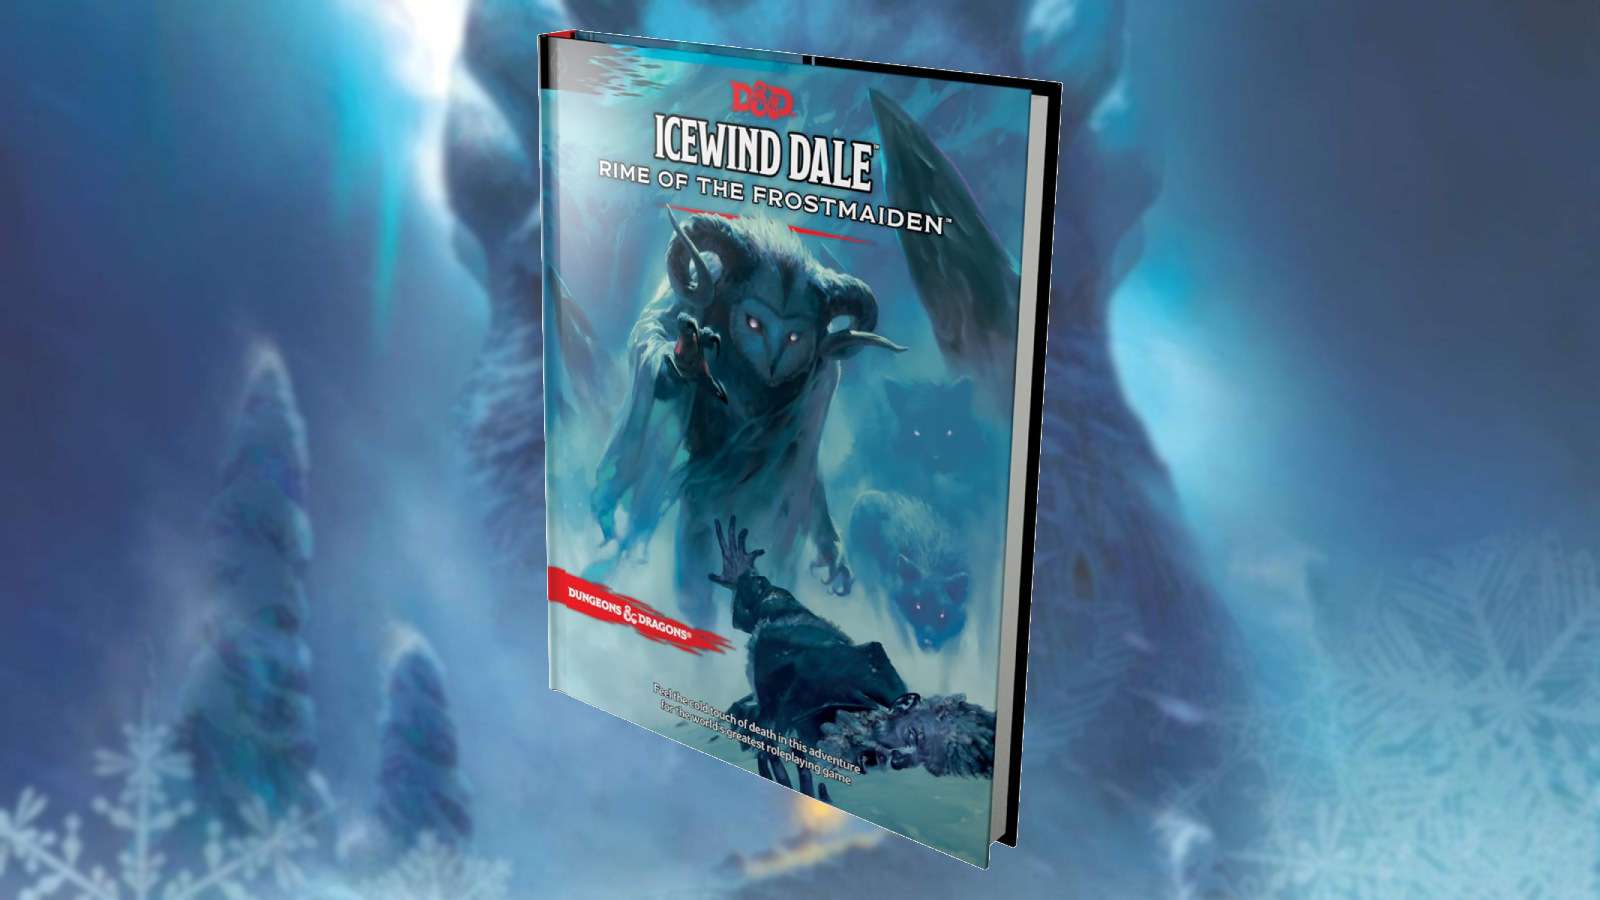 D&D Frostmaiden book and background